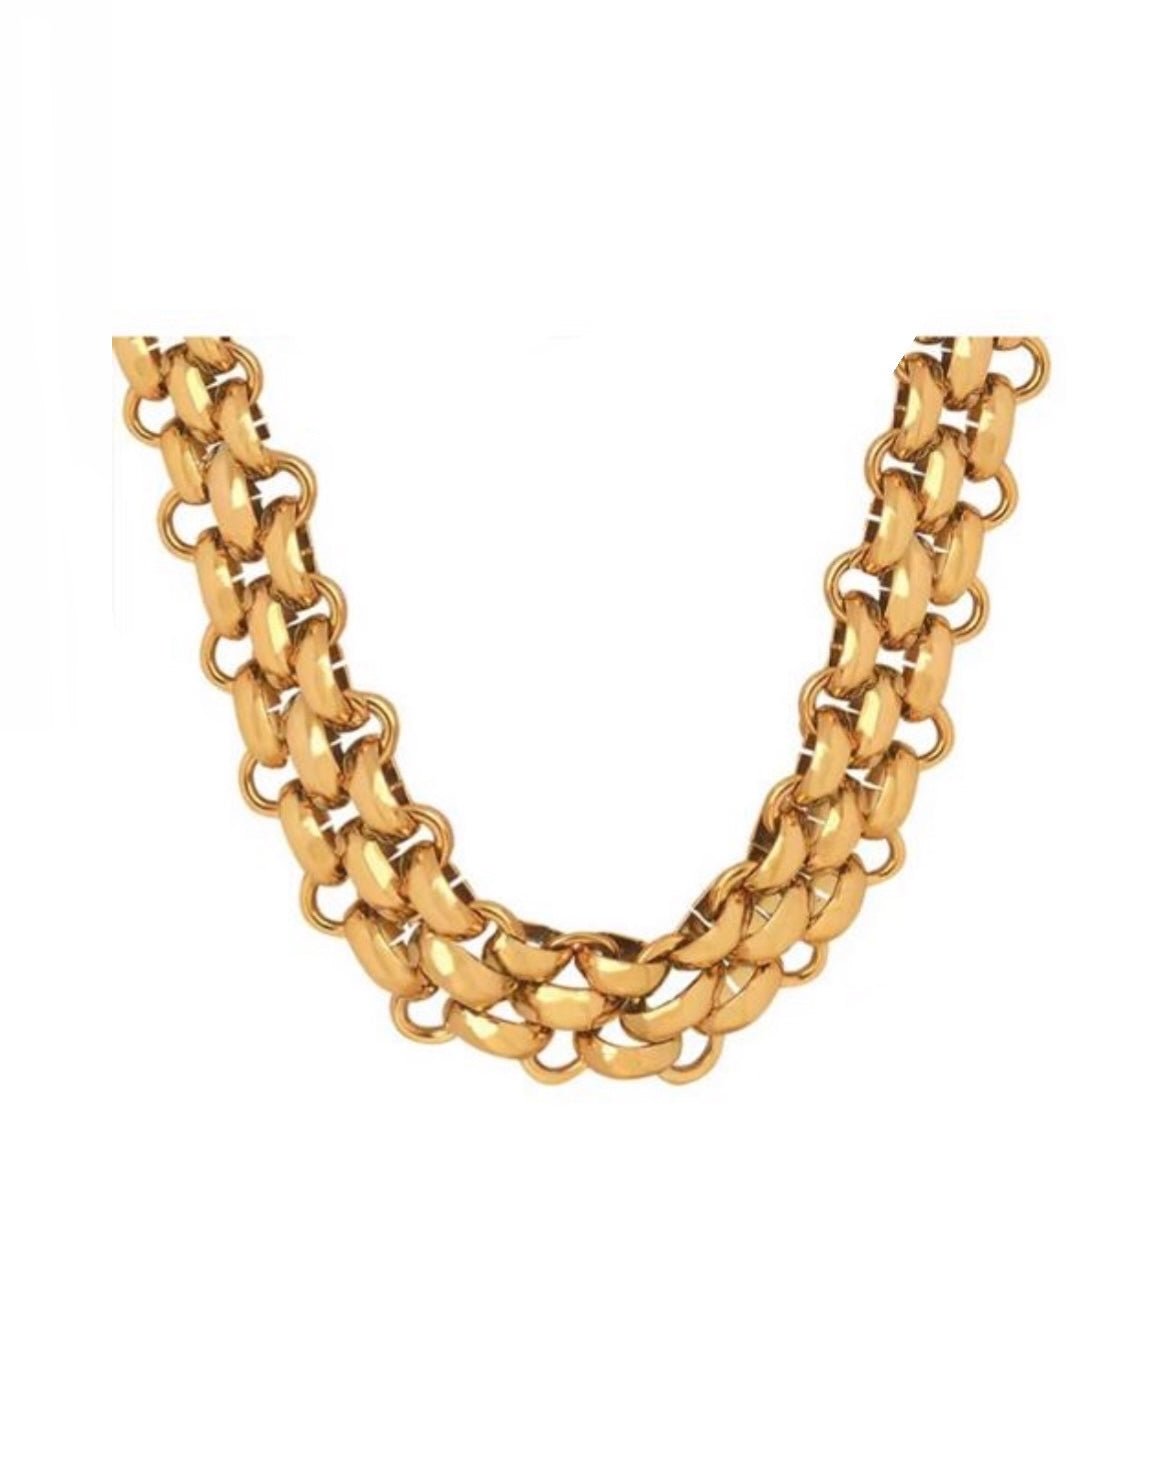 Special Offer - Antique Gold Necklace